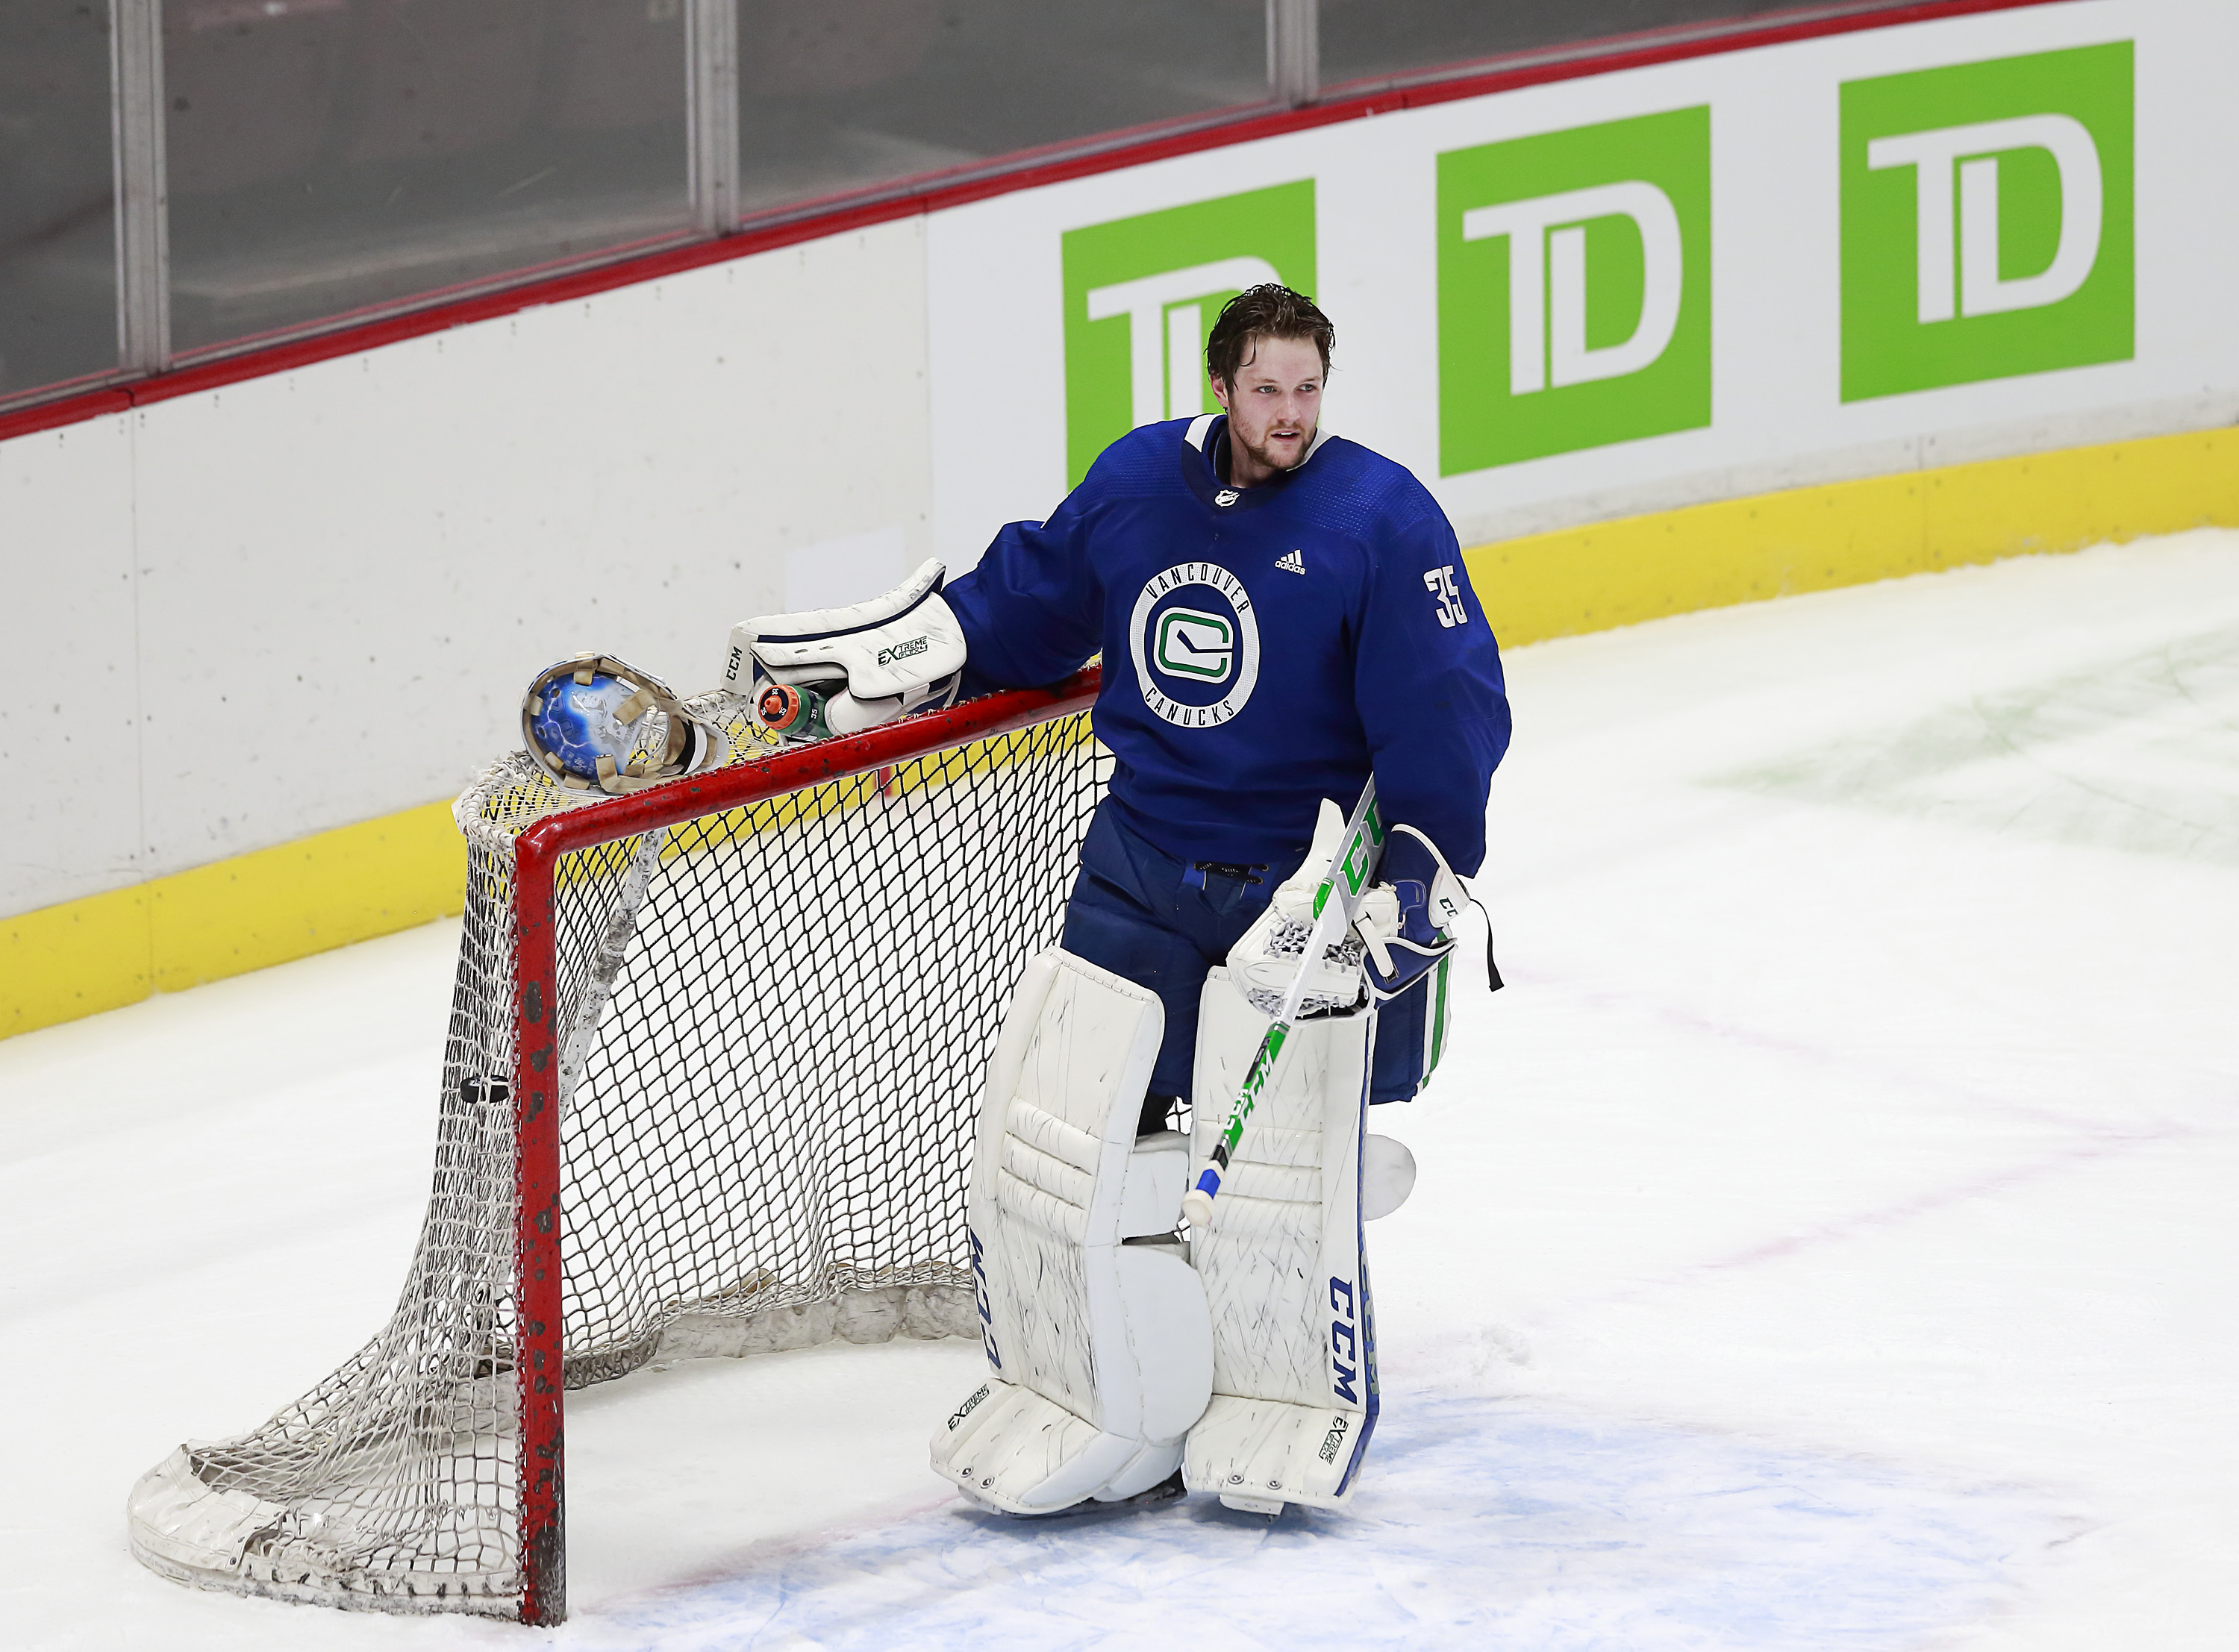 Thatcher Demko Doesn't Want To Stay In Vancouver